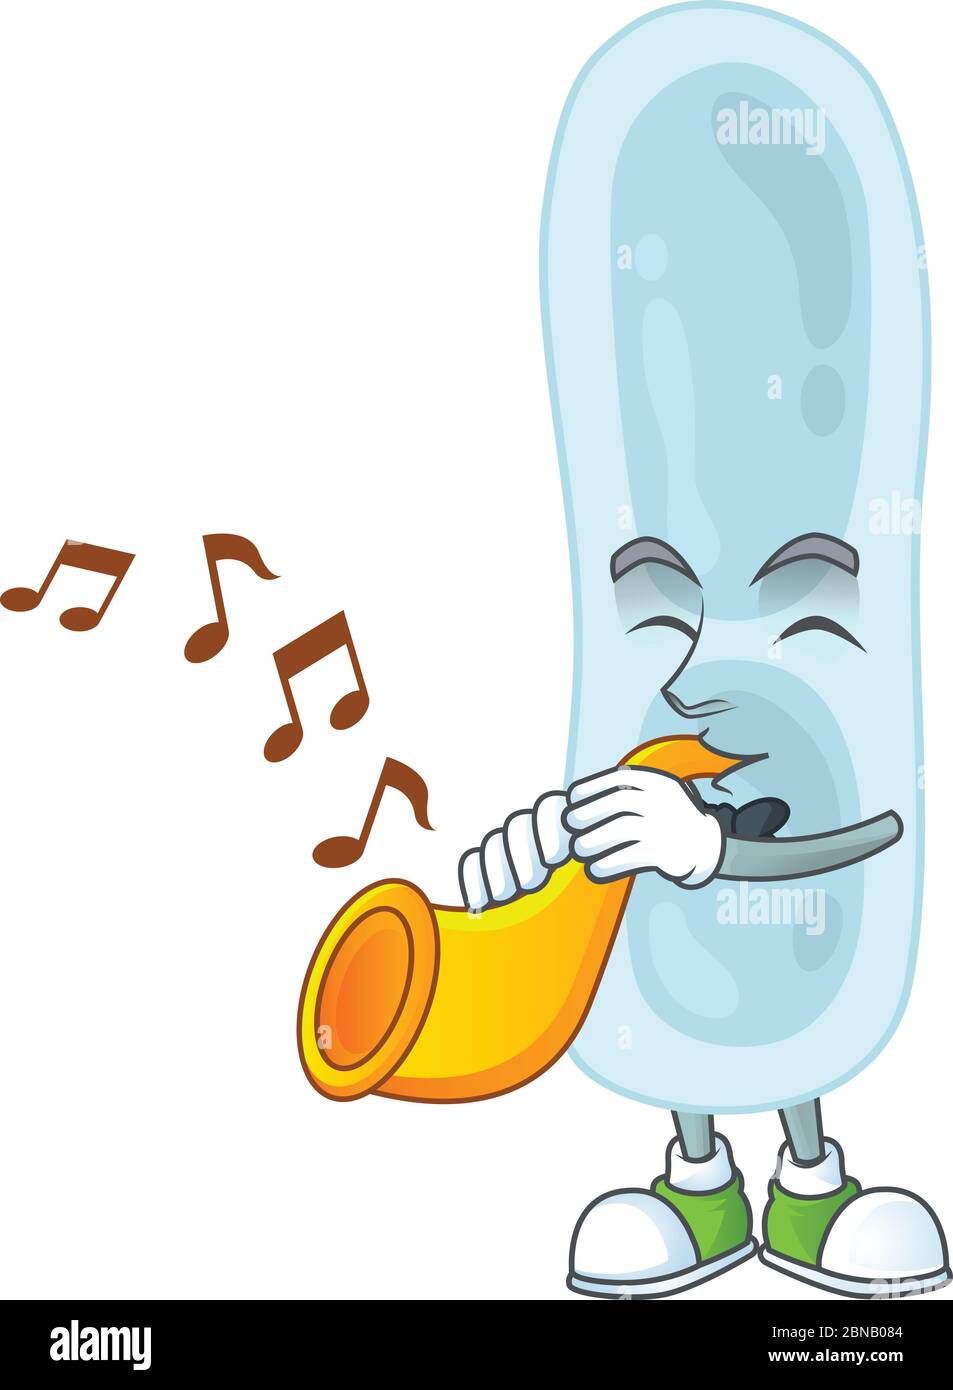 Talented musician of klebsiella pneumoniae mascot design playing music with a trumpet Stock Vector